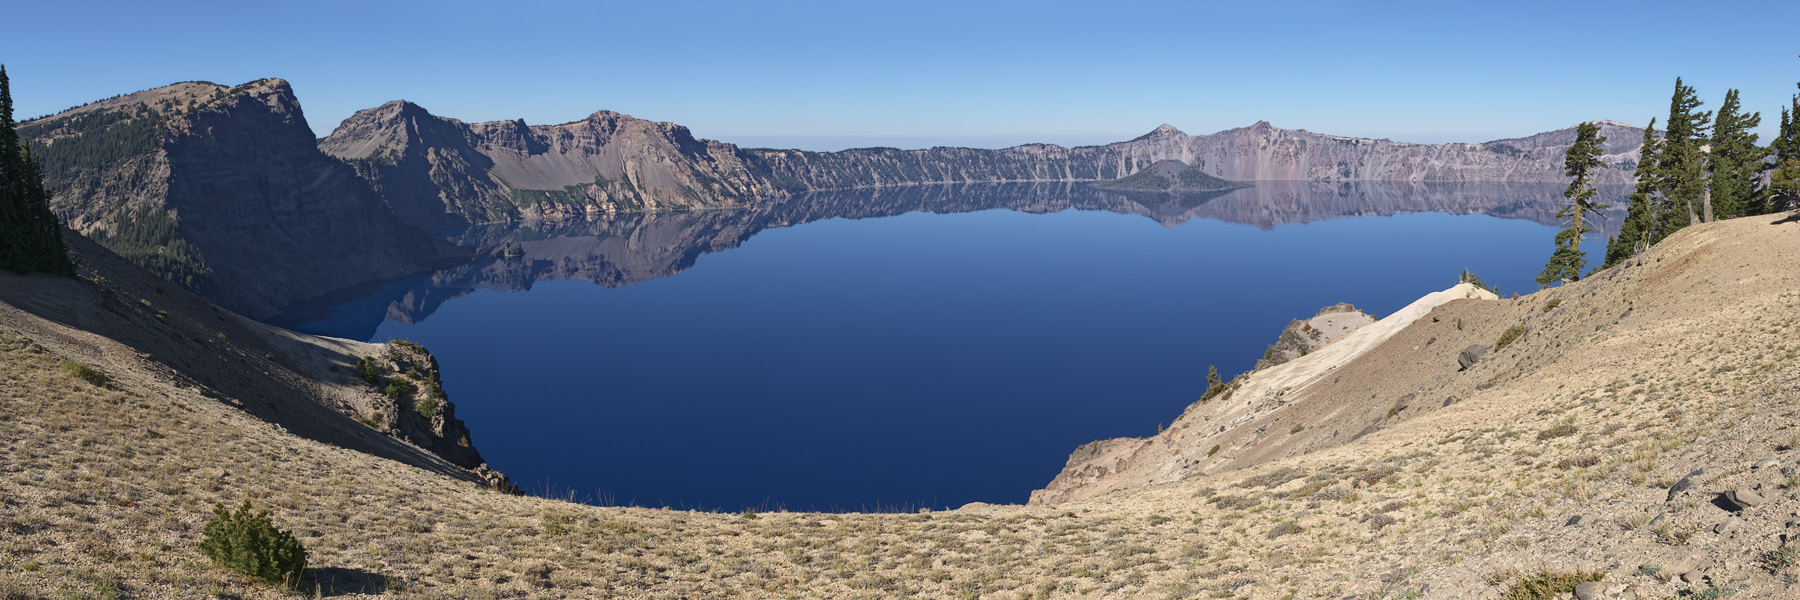 Crater Lake from the East Rim